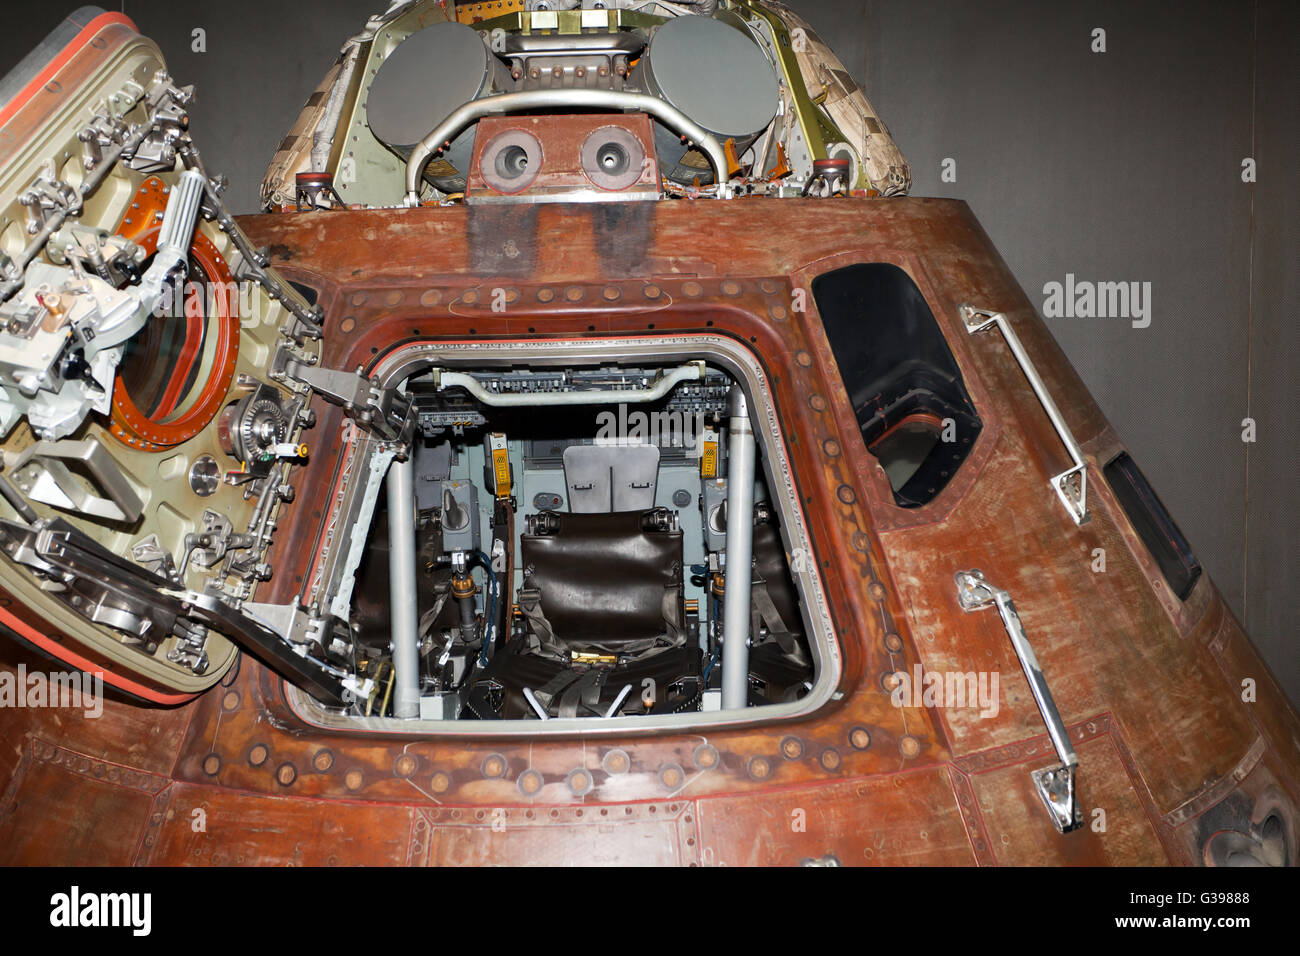 Close-up view of the Apollo 14 Command Module on display at the Kennedy Space Centre Visitors Complex, Merritt Island, Florida. Stock Photo